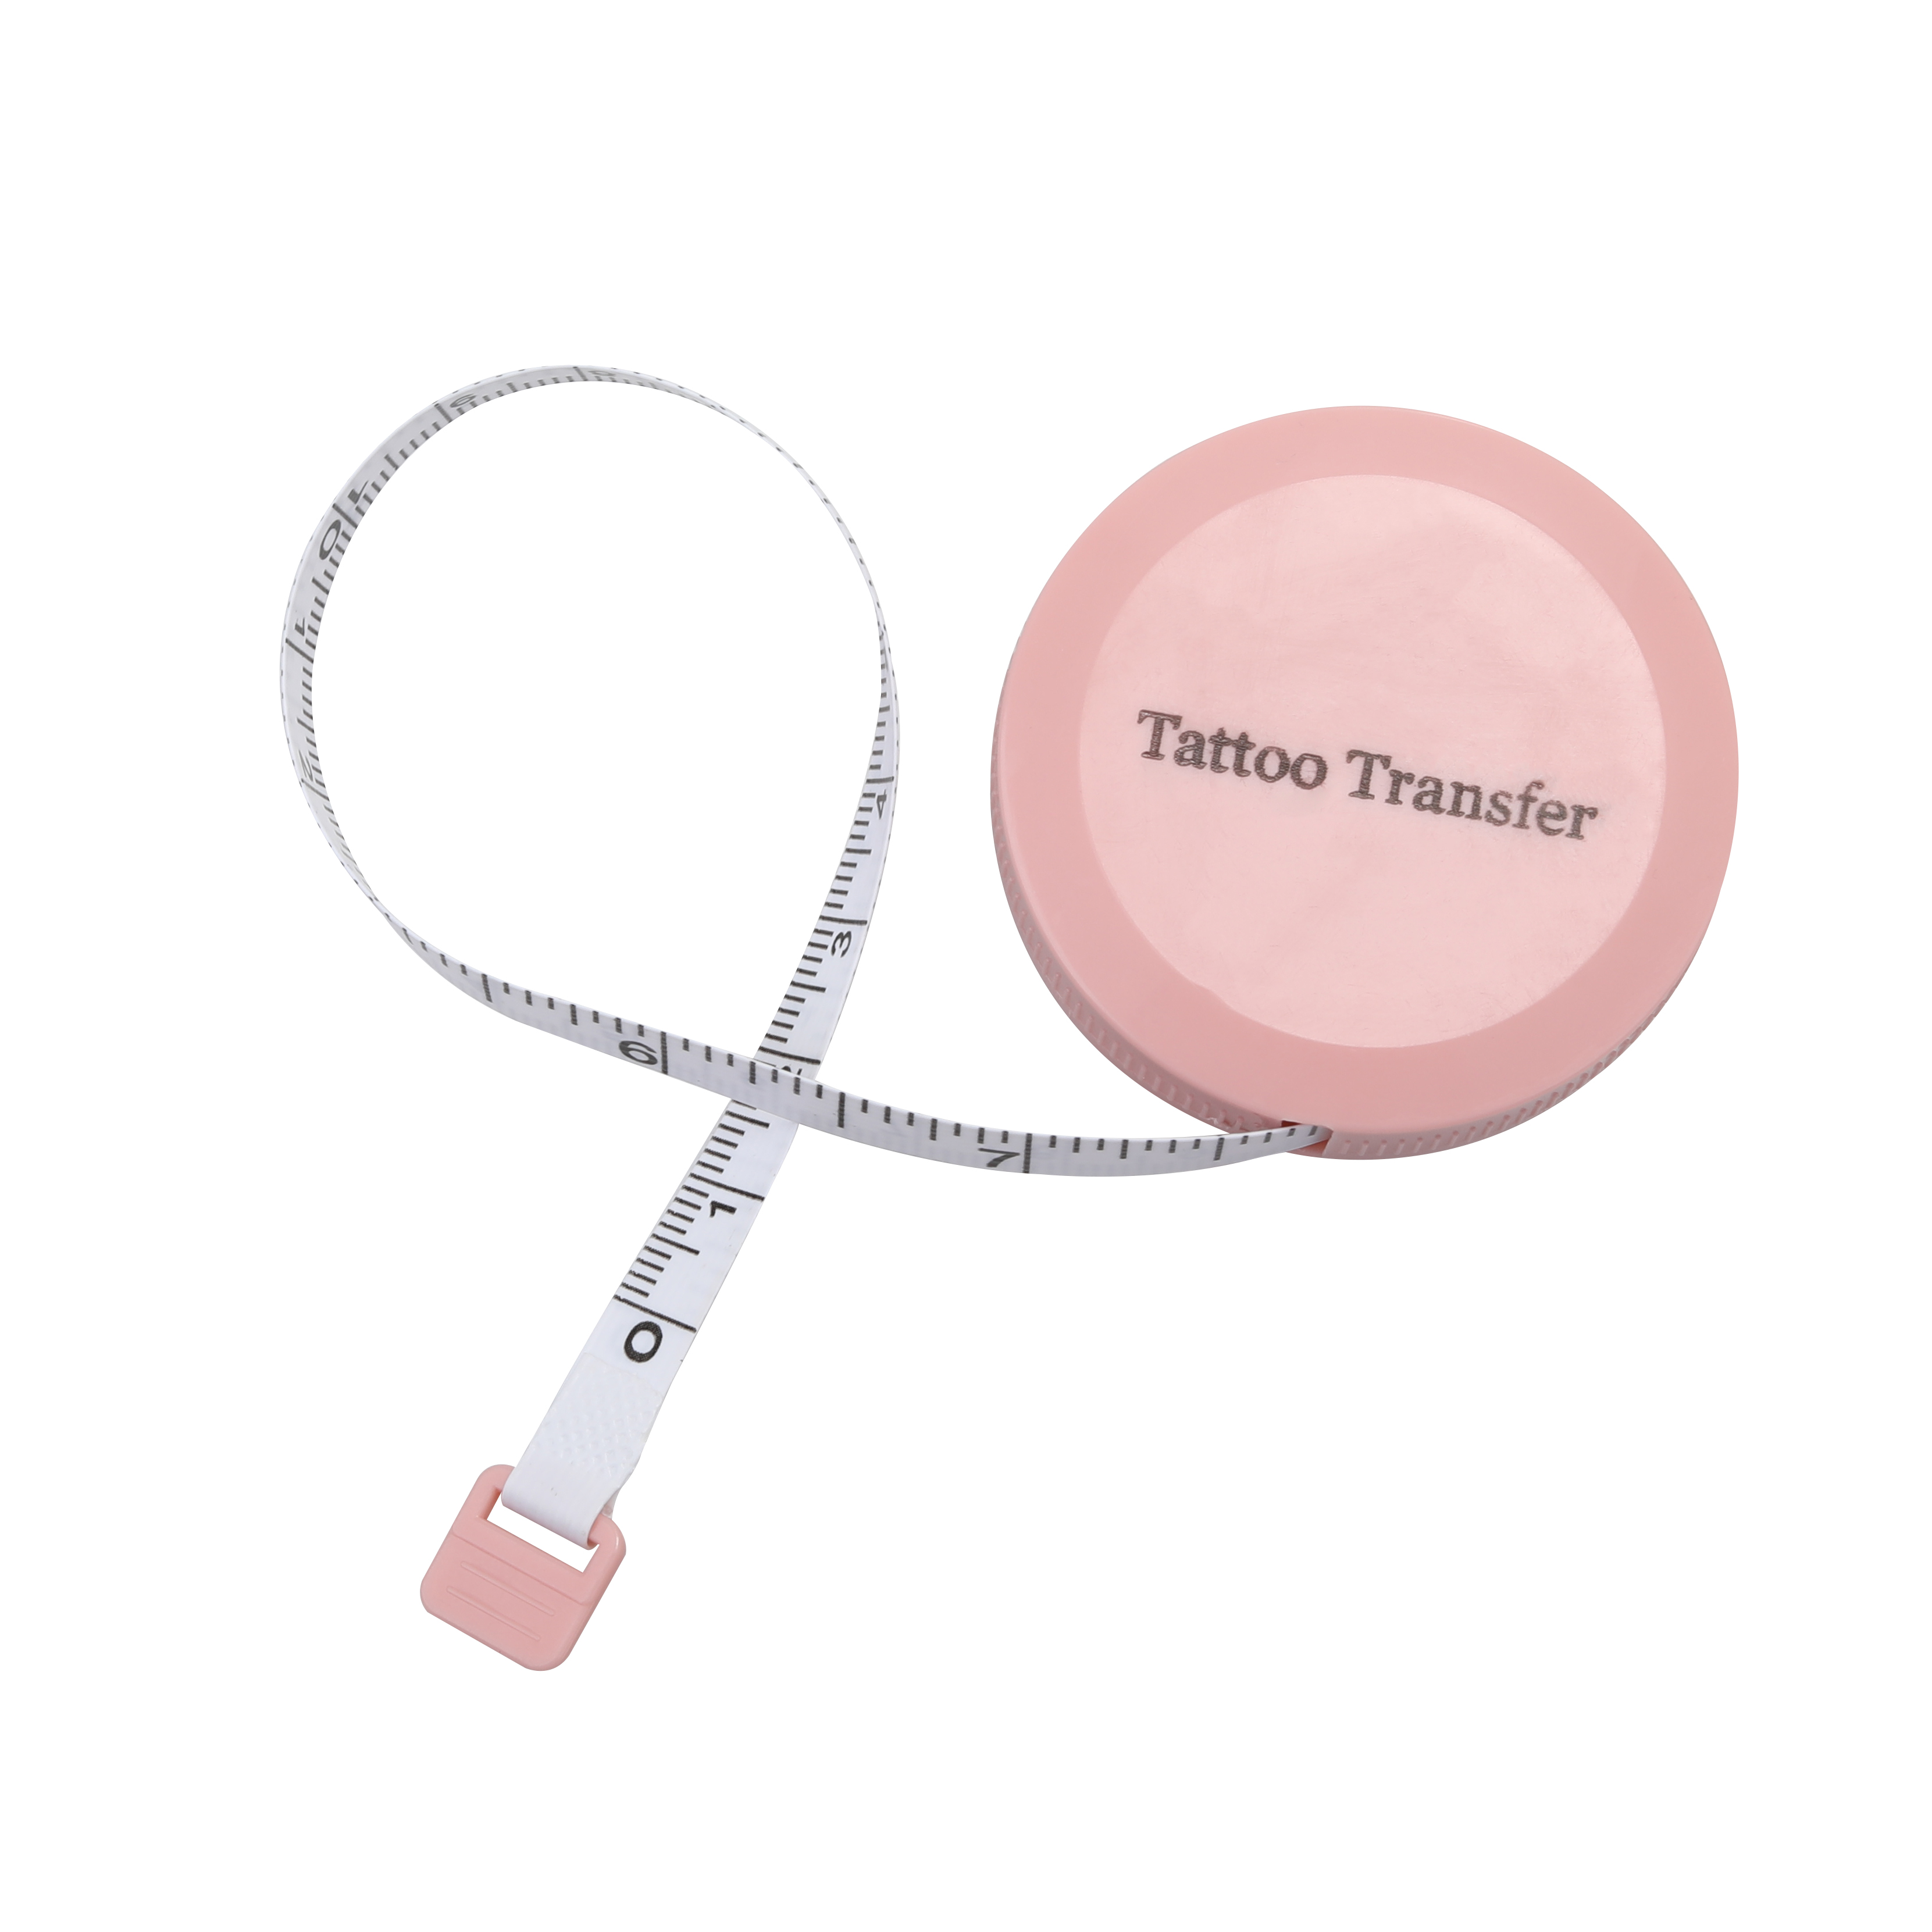 Tattoo Transfer Tape Measures, 60-Inch 1.5 Meter Mini Portable Retractable PU leather measuring tape.